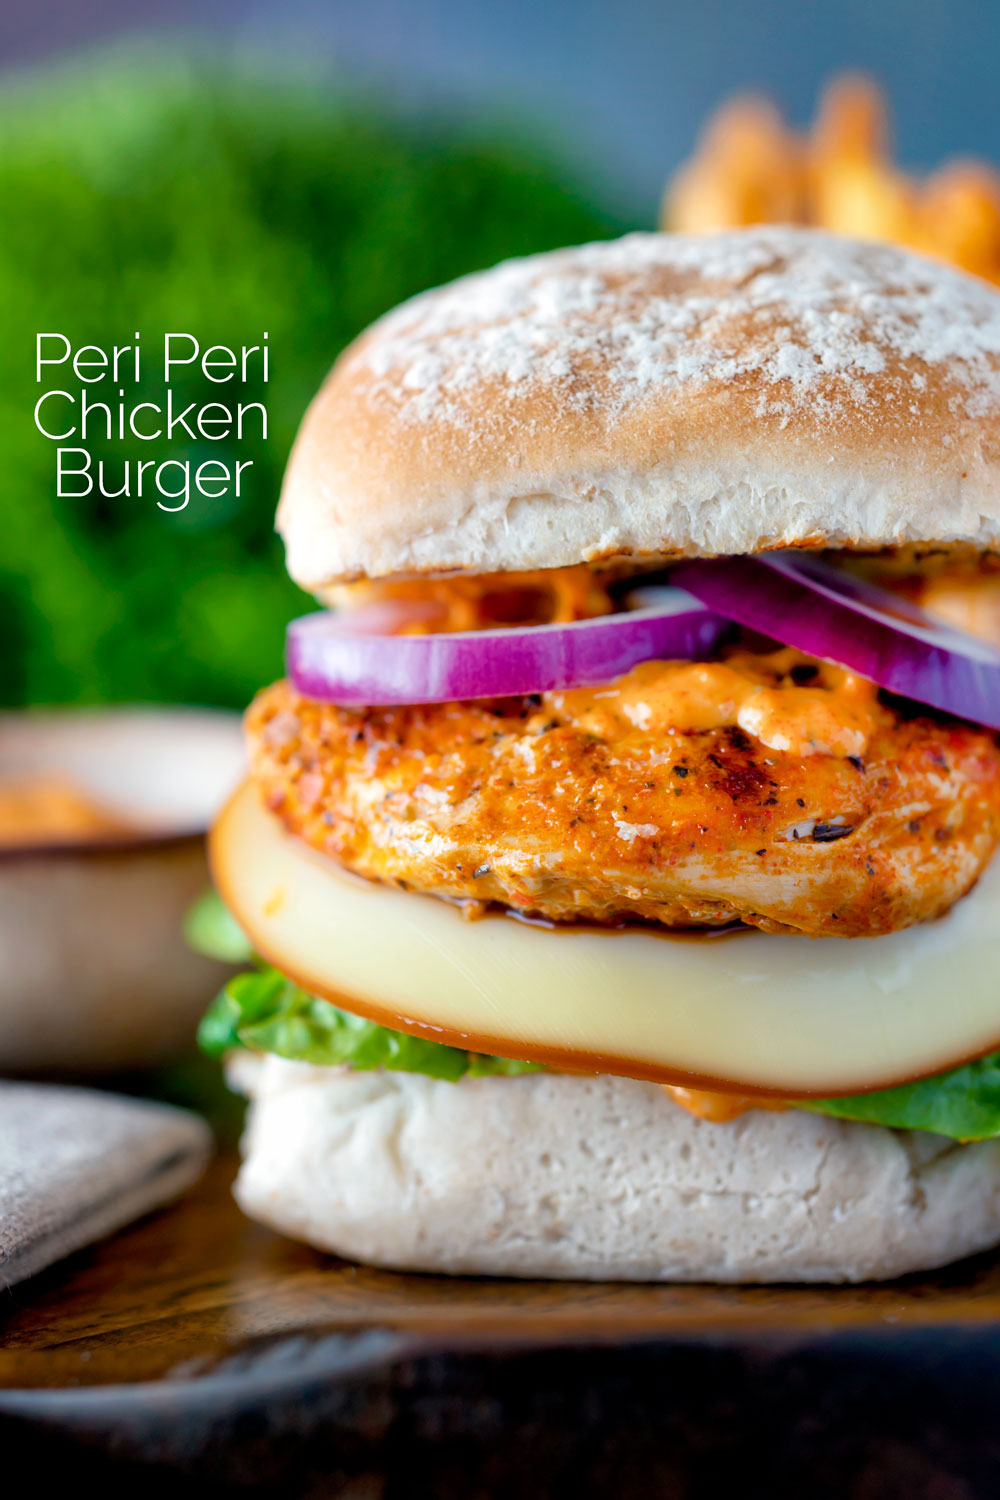 Peri peri chicken burger served with red onion and smoked cheese featuring a title overlay.